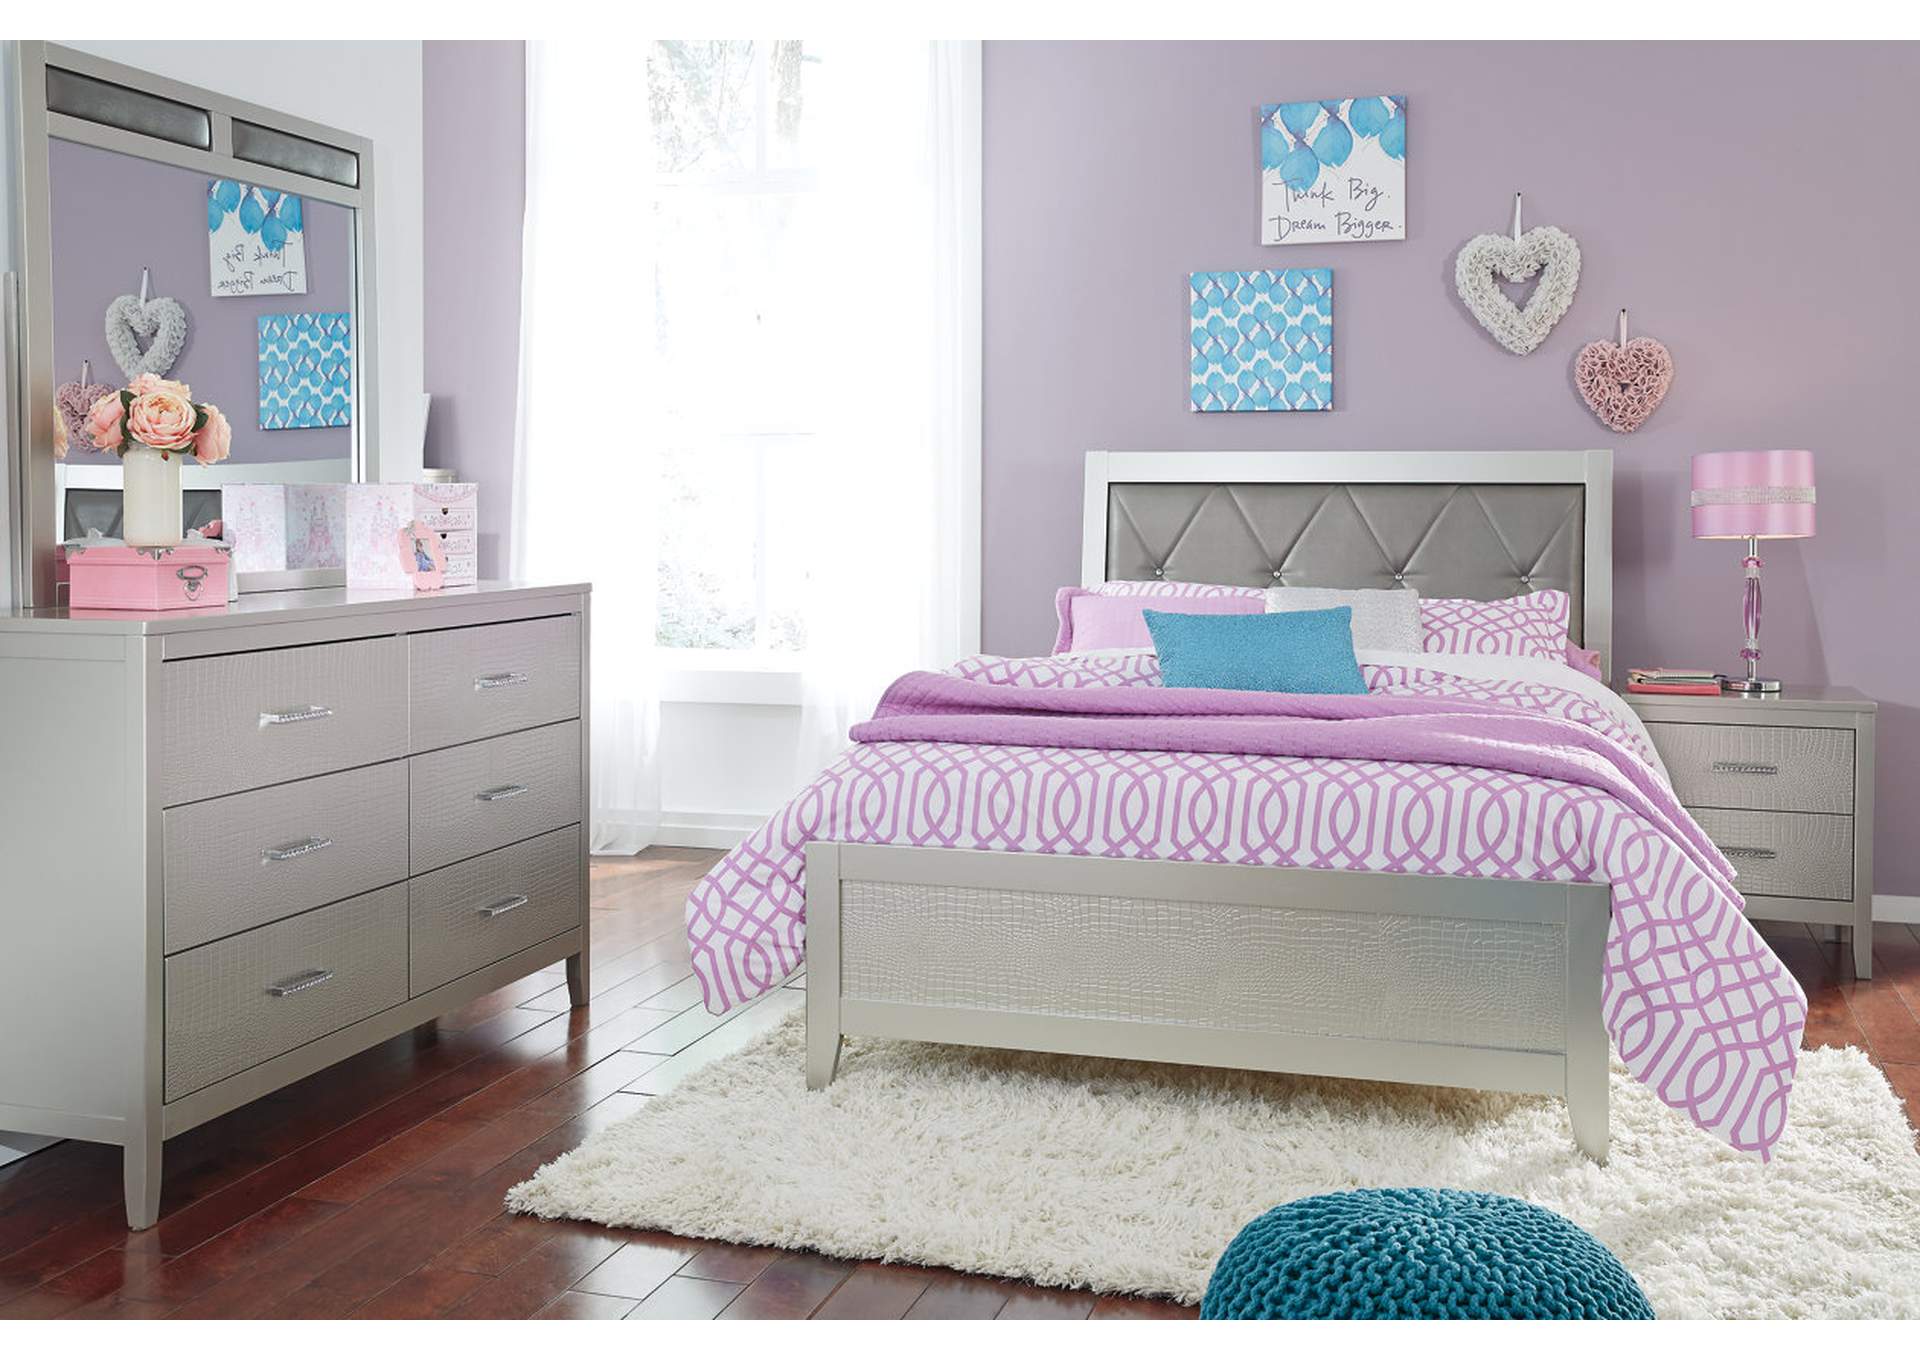 Olivet Twin Panel Bed,Signature Design By Ashley